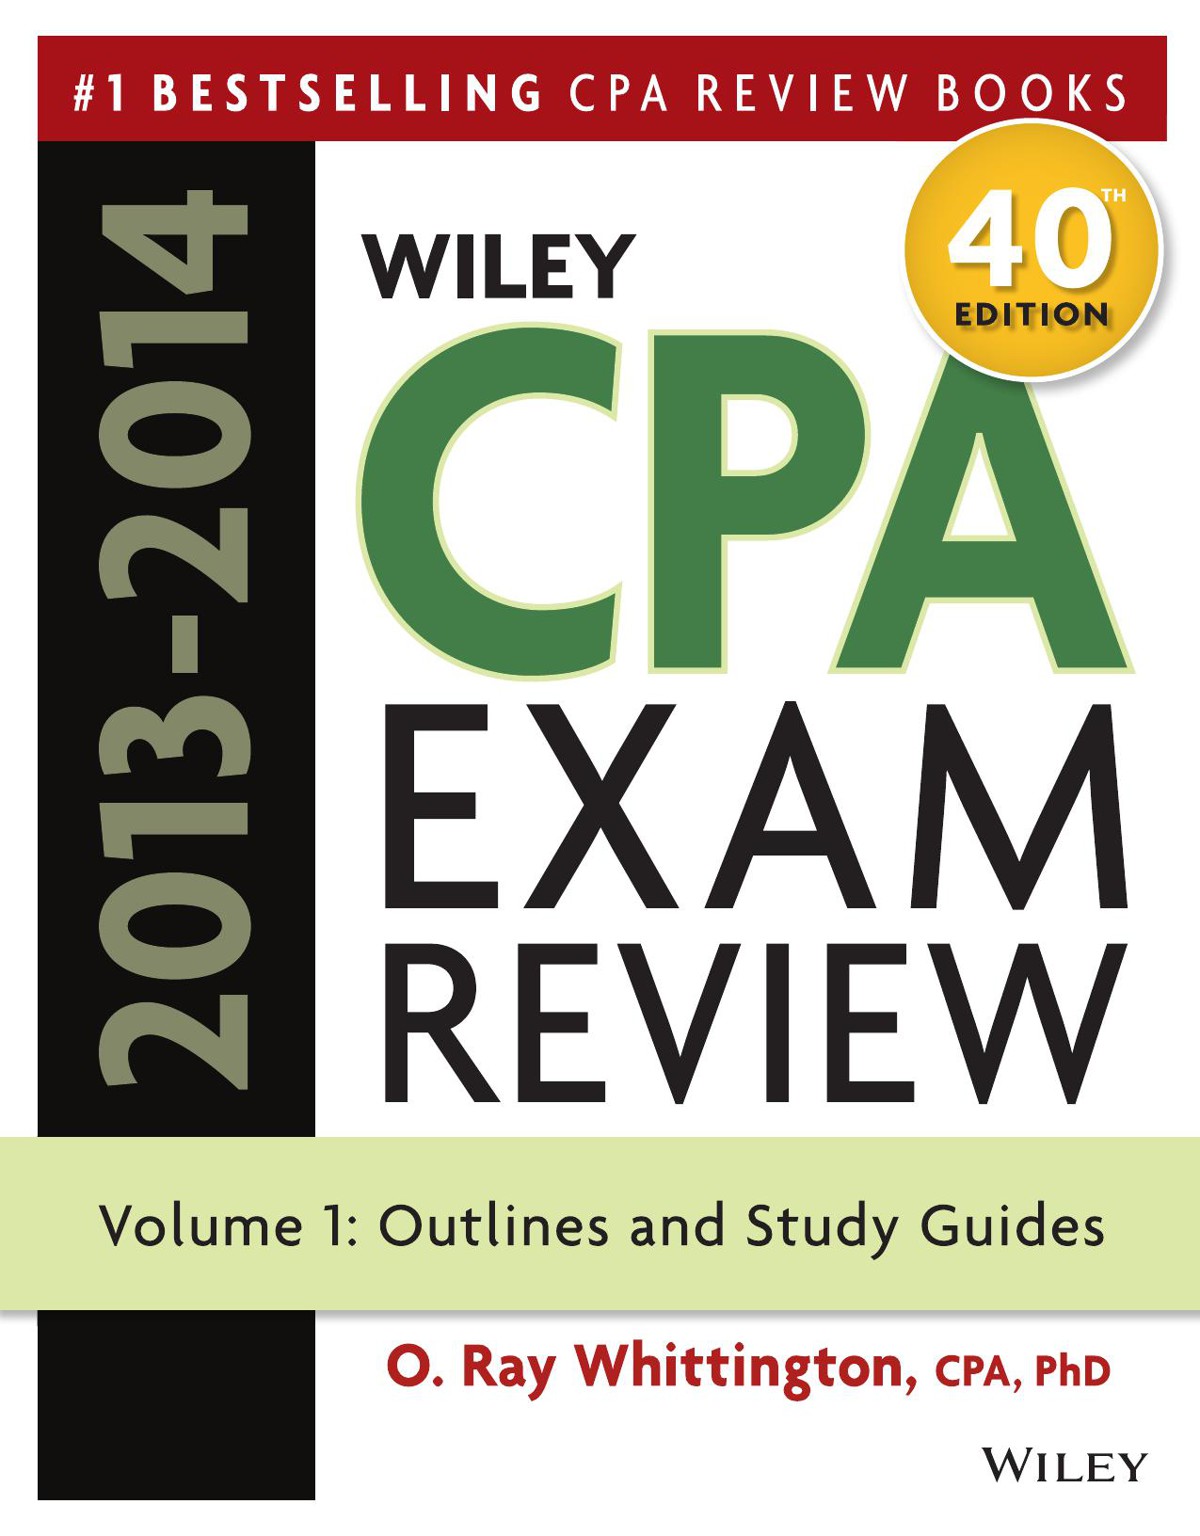 wiley cpa exam review 2013